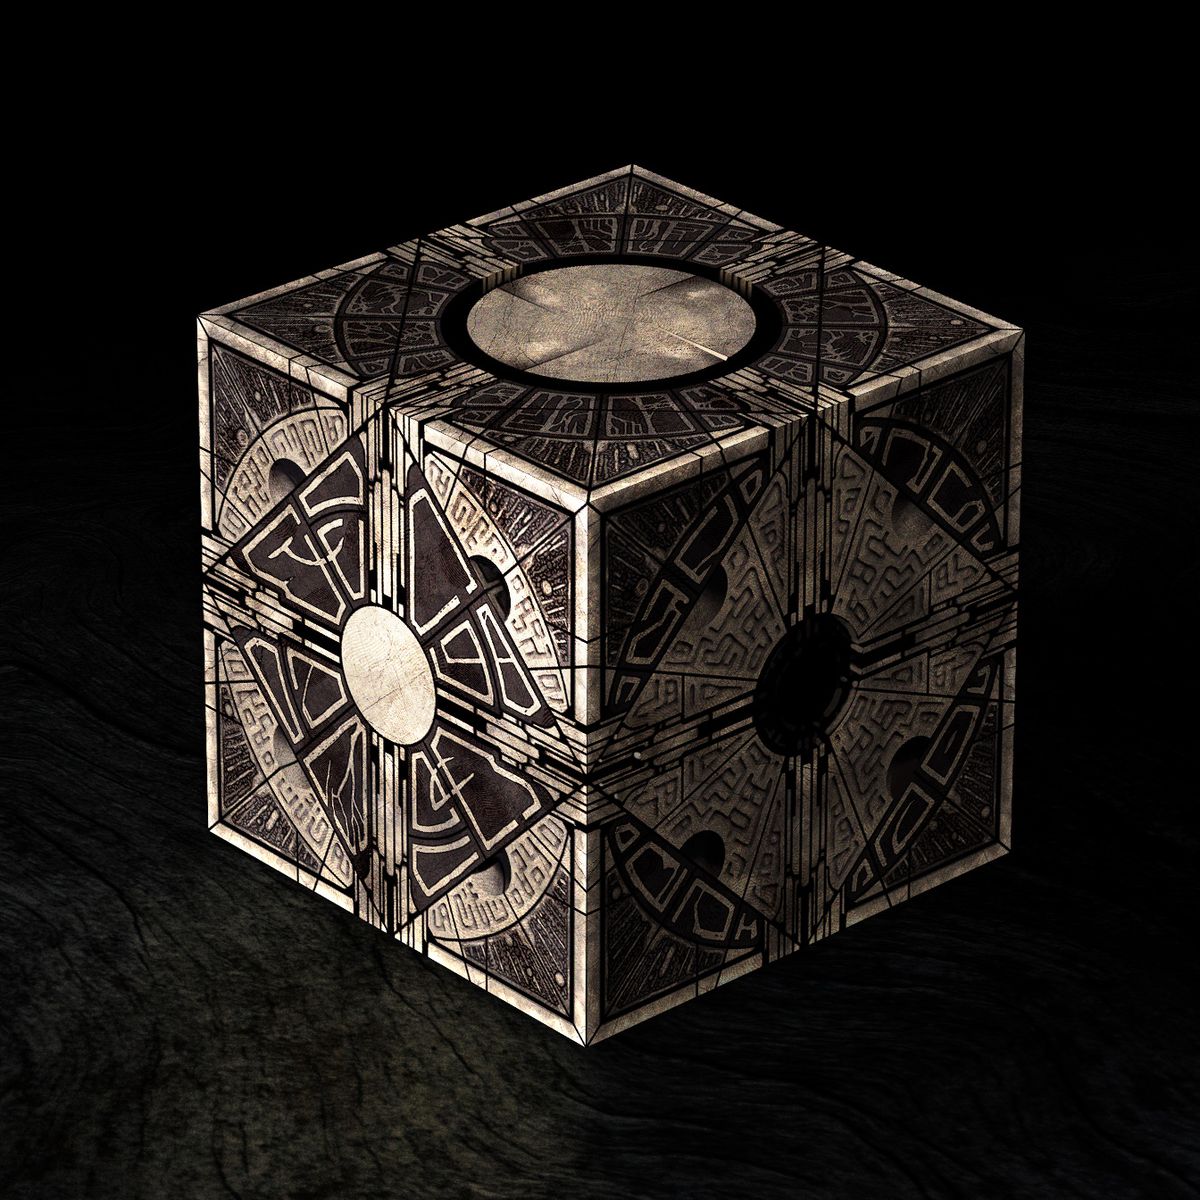 Concept art for the design of the “Lament Configuration” of the puzzle box from Hellraiser (2022), a black cube with a complex design etched in sliver.